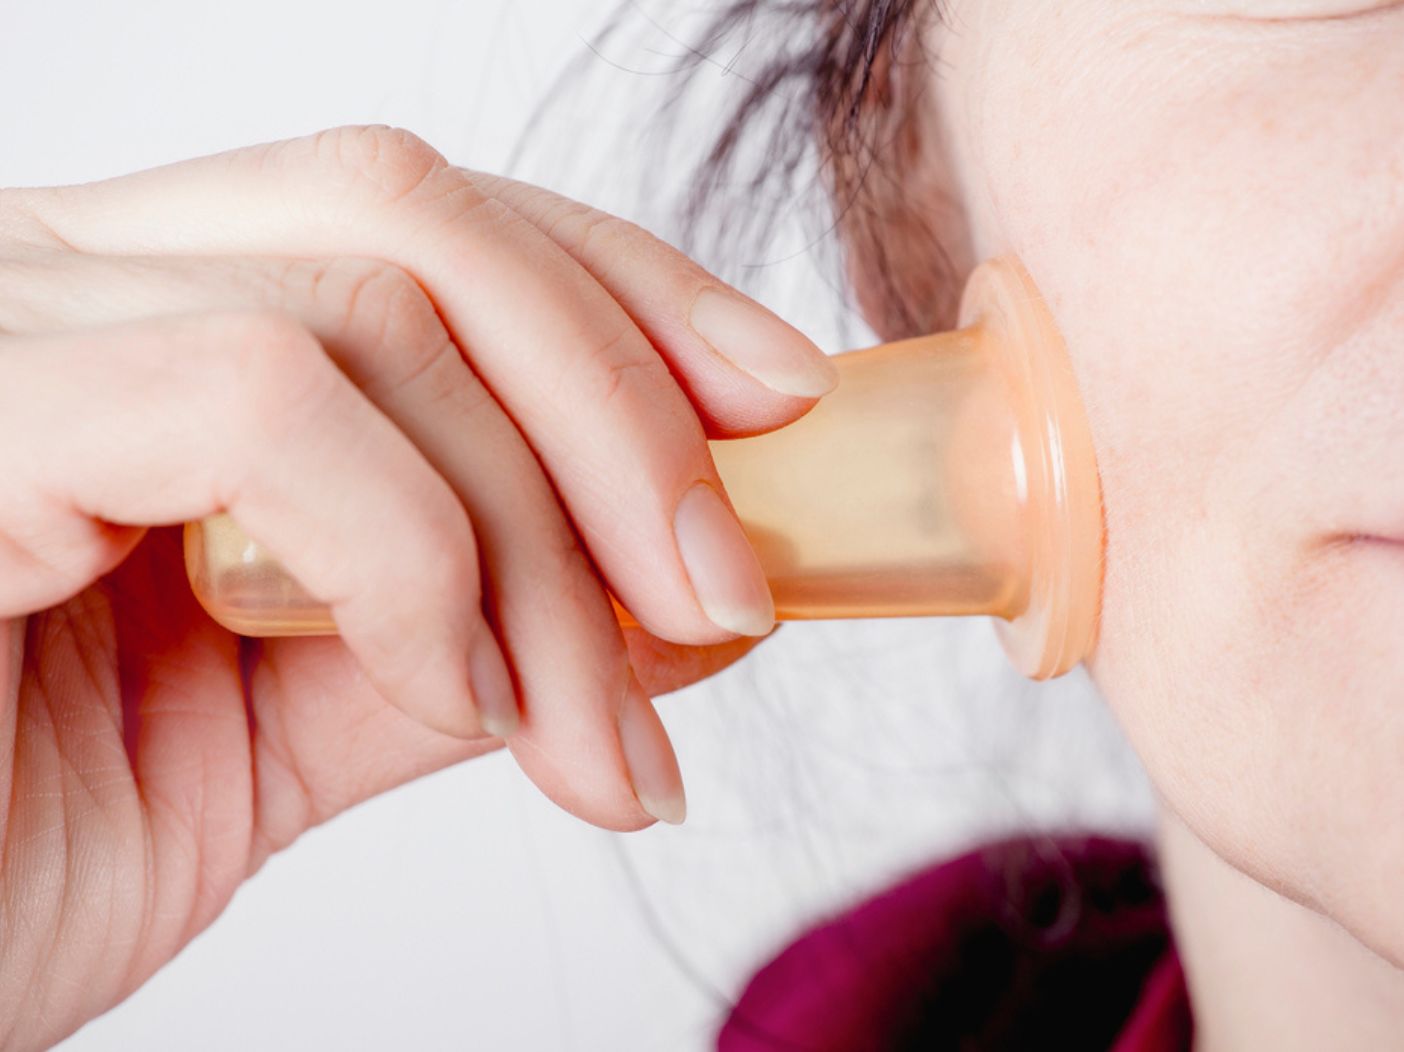 Facial Cupping Can Reduce Wrinkles Safely If You Follow These Tips